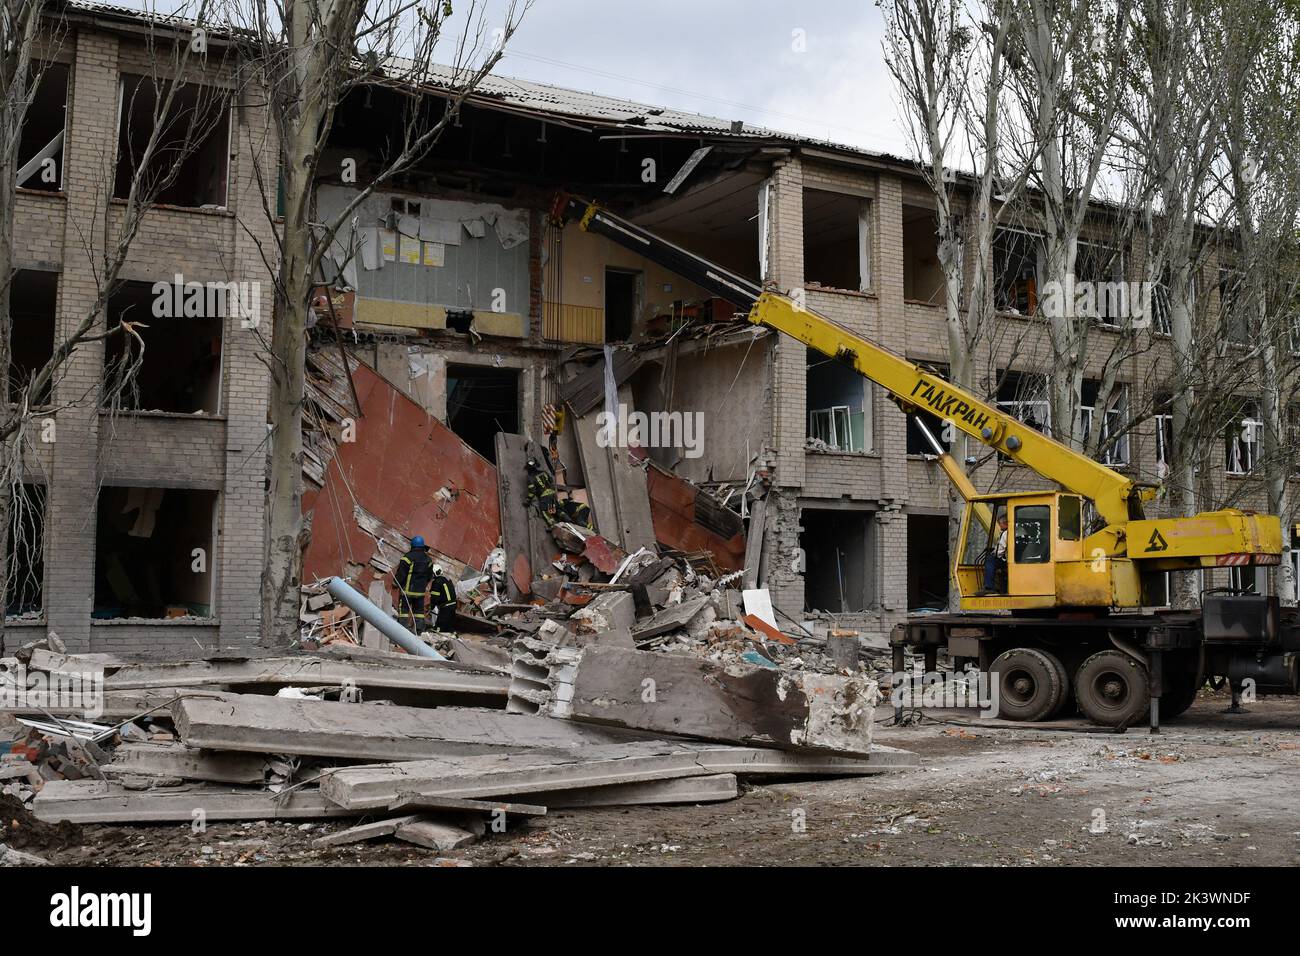 Rescuers work at a site of a high school that was heavily damaged by Russian shelling in Mykolaivka. Dmitry Peskov, press secretary of the Russian President, has stated that Russia will continue the war even after sham referendums are conducted, and it will aim to occupy the entire territory of Donetsk Oblast. Stock Photo